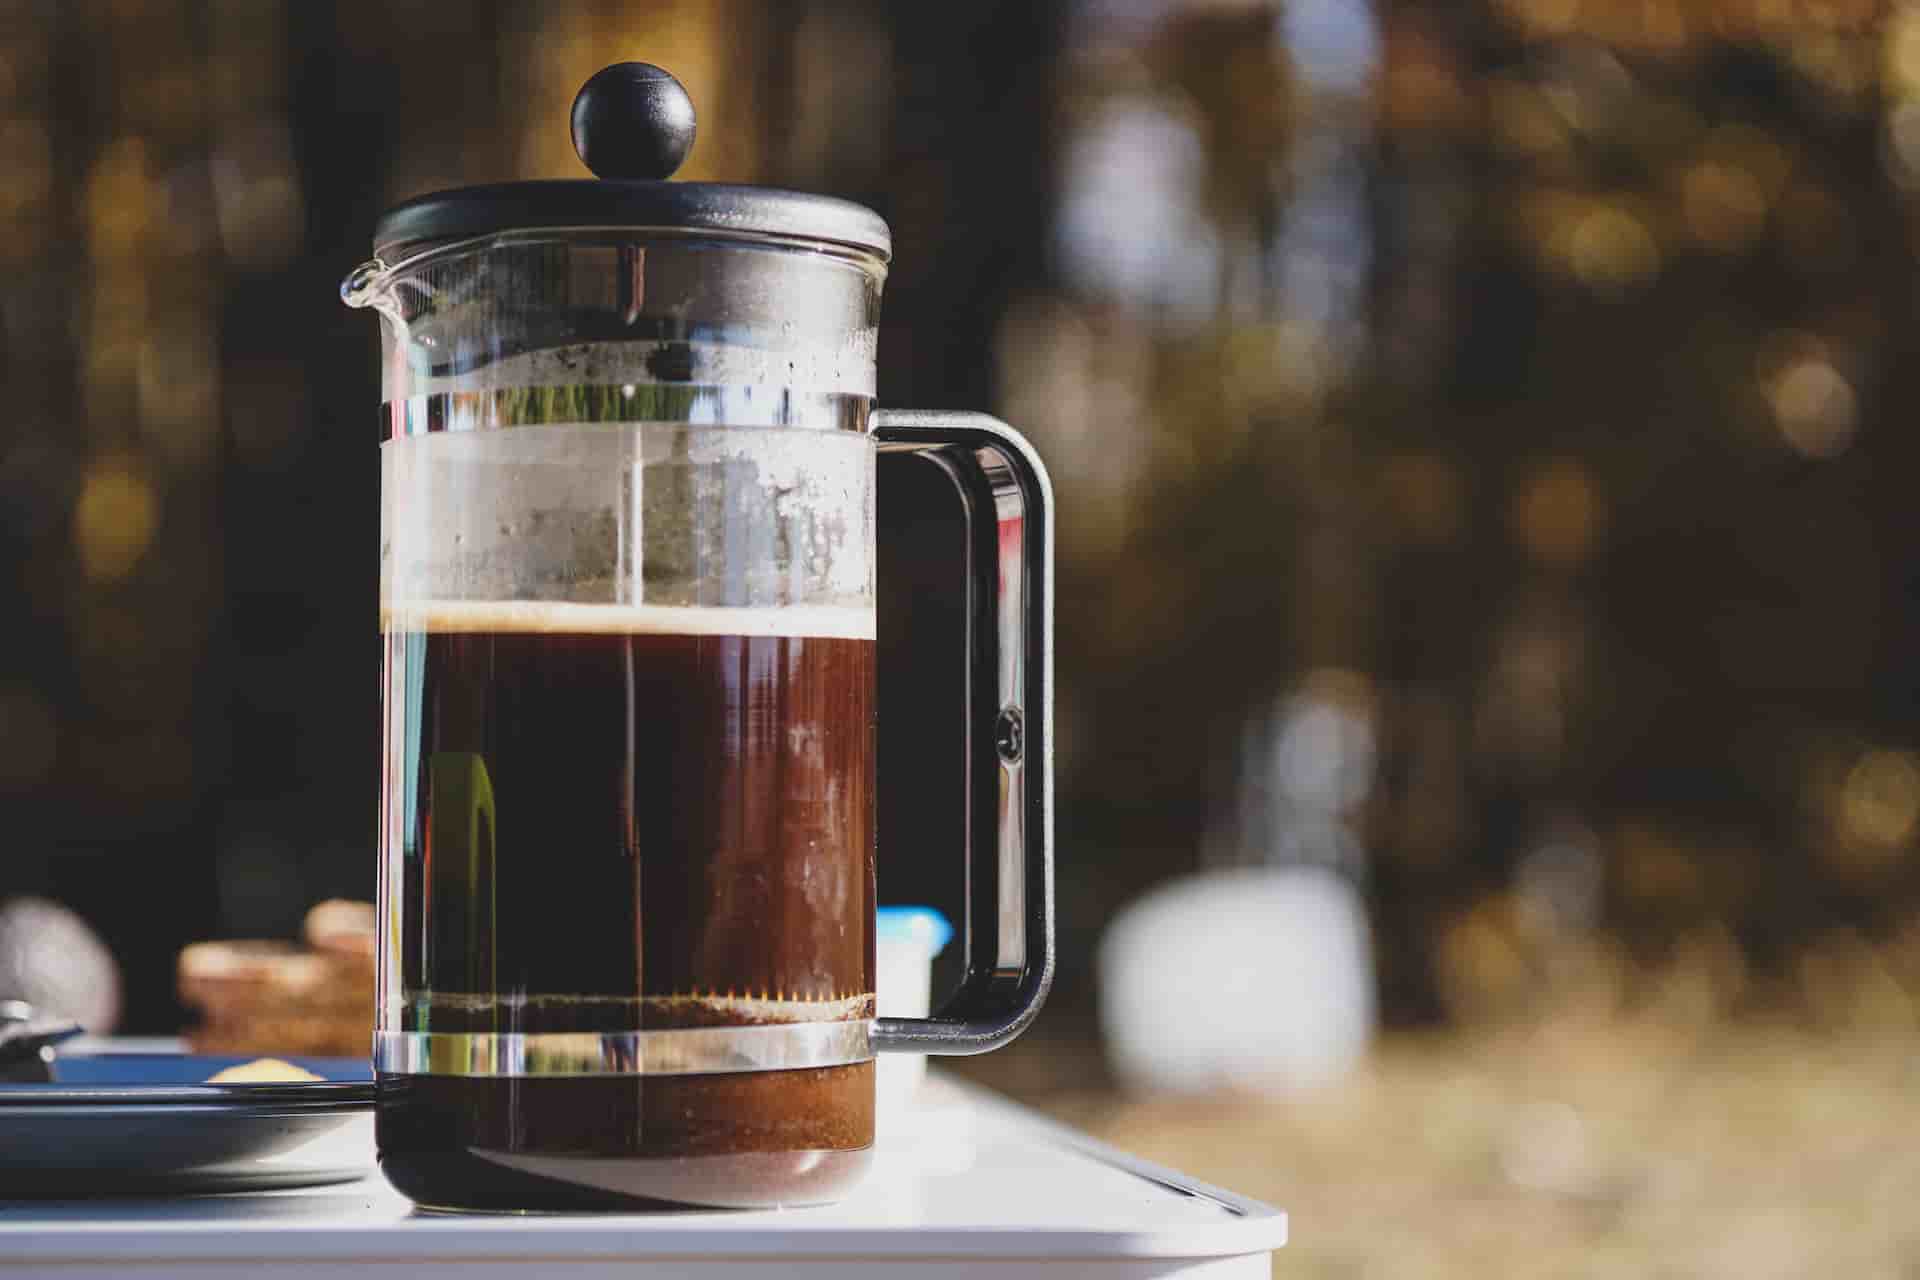 Best Camping French Press